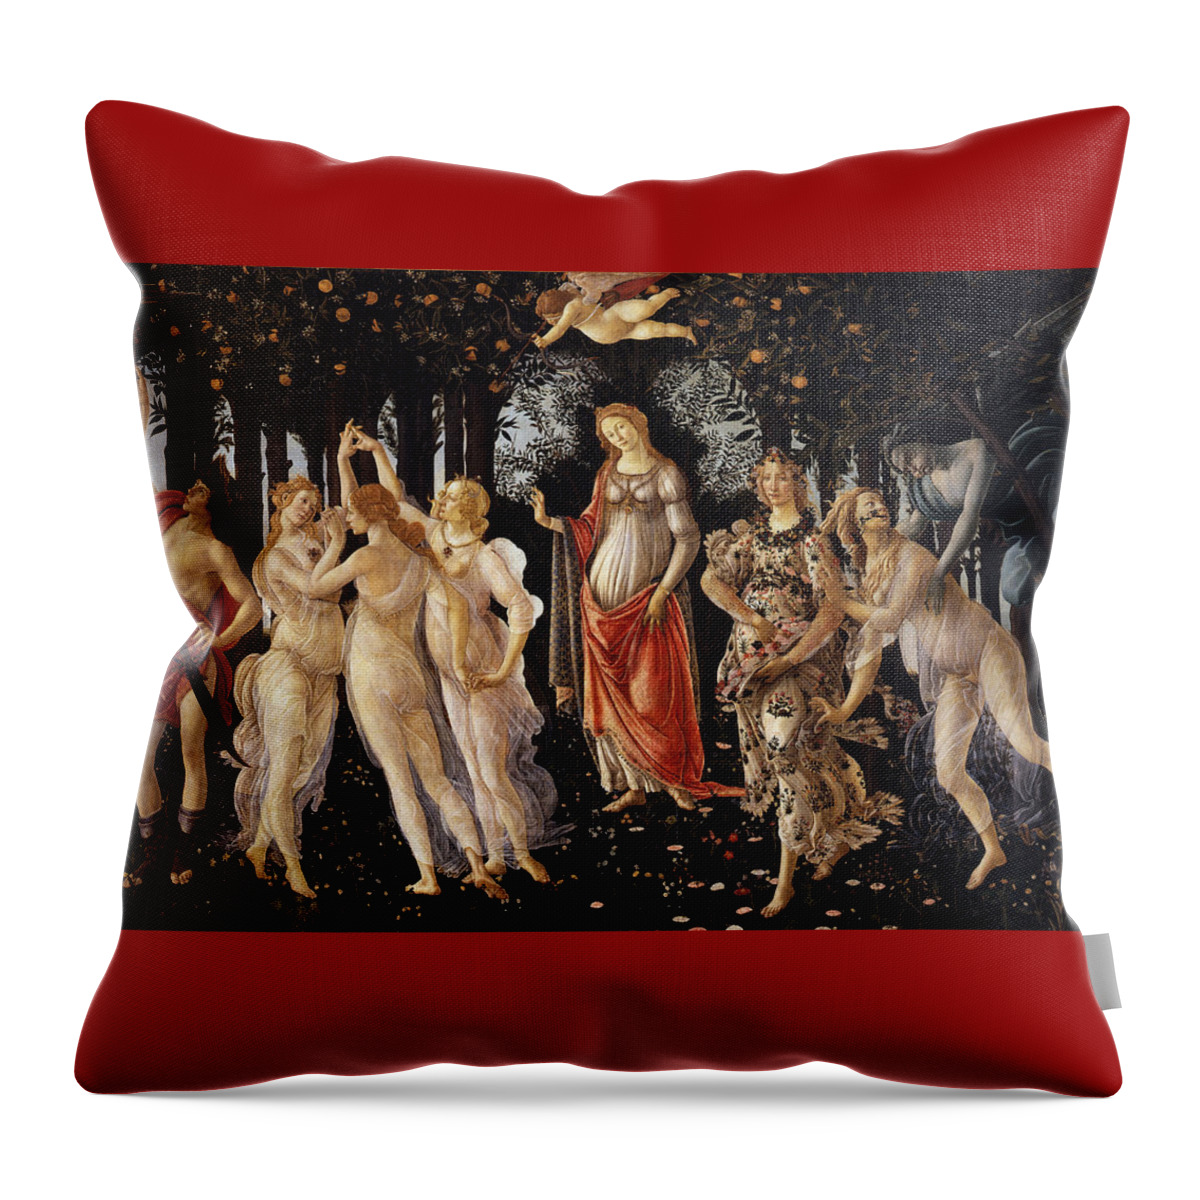 Primavera By Botticelli Throw Pillow featuring the pyrography Primavera by Botticelli by Desiderata Gallery